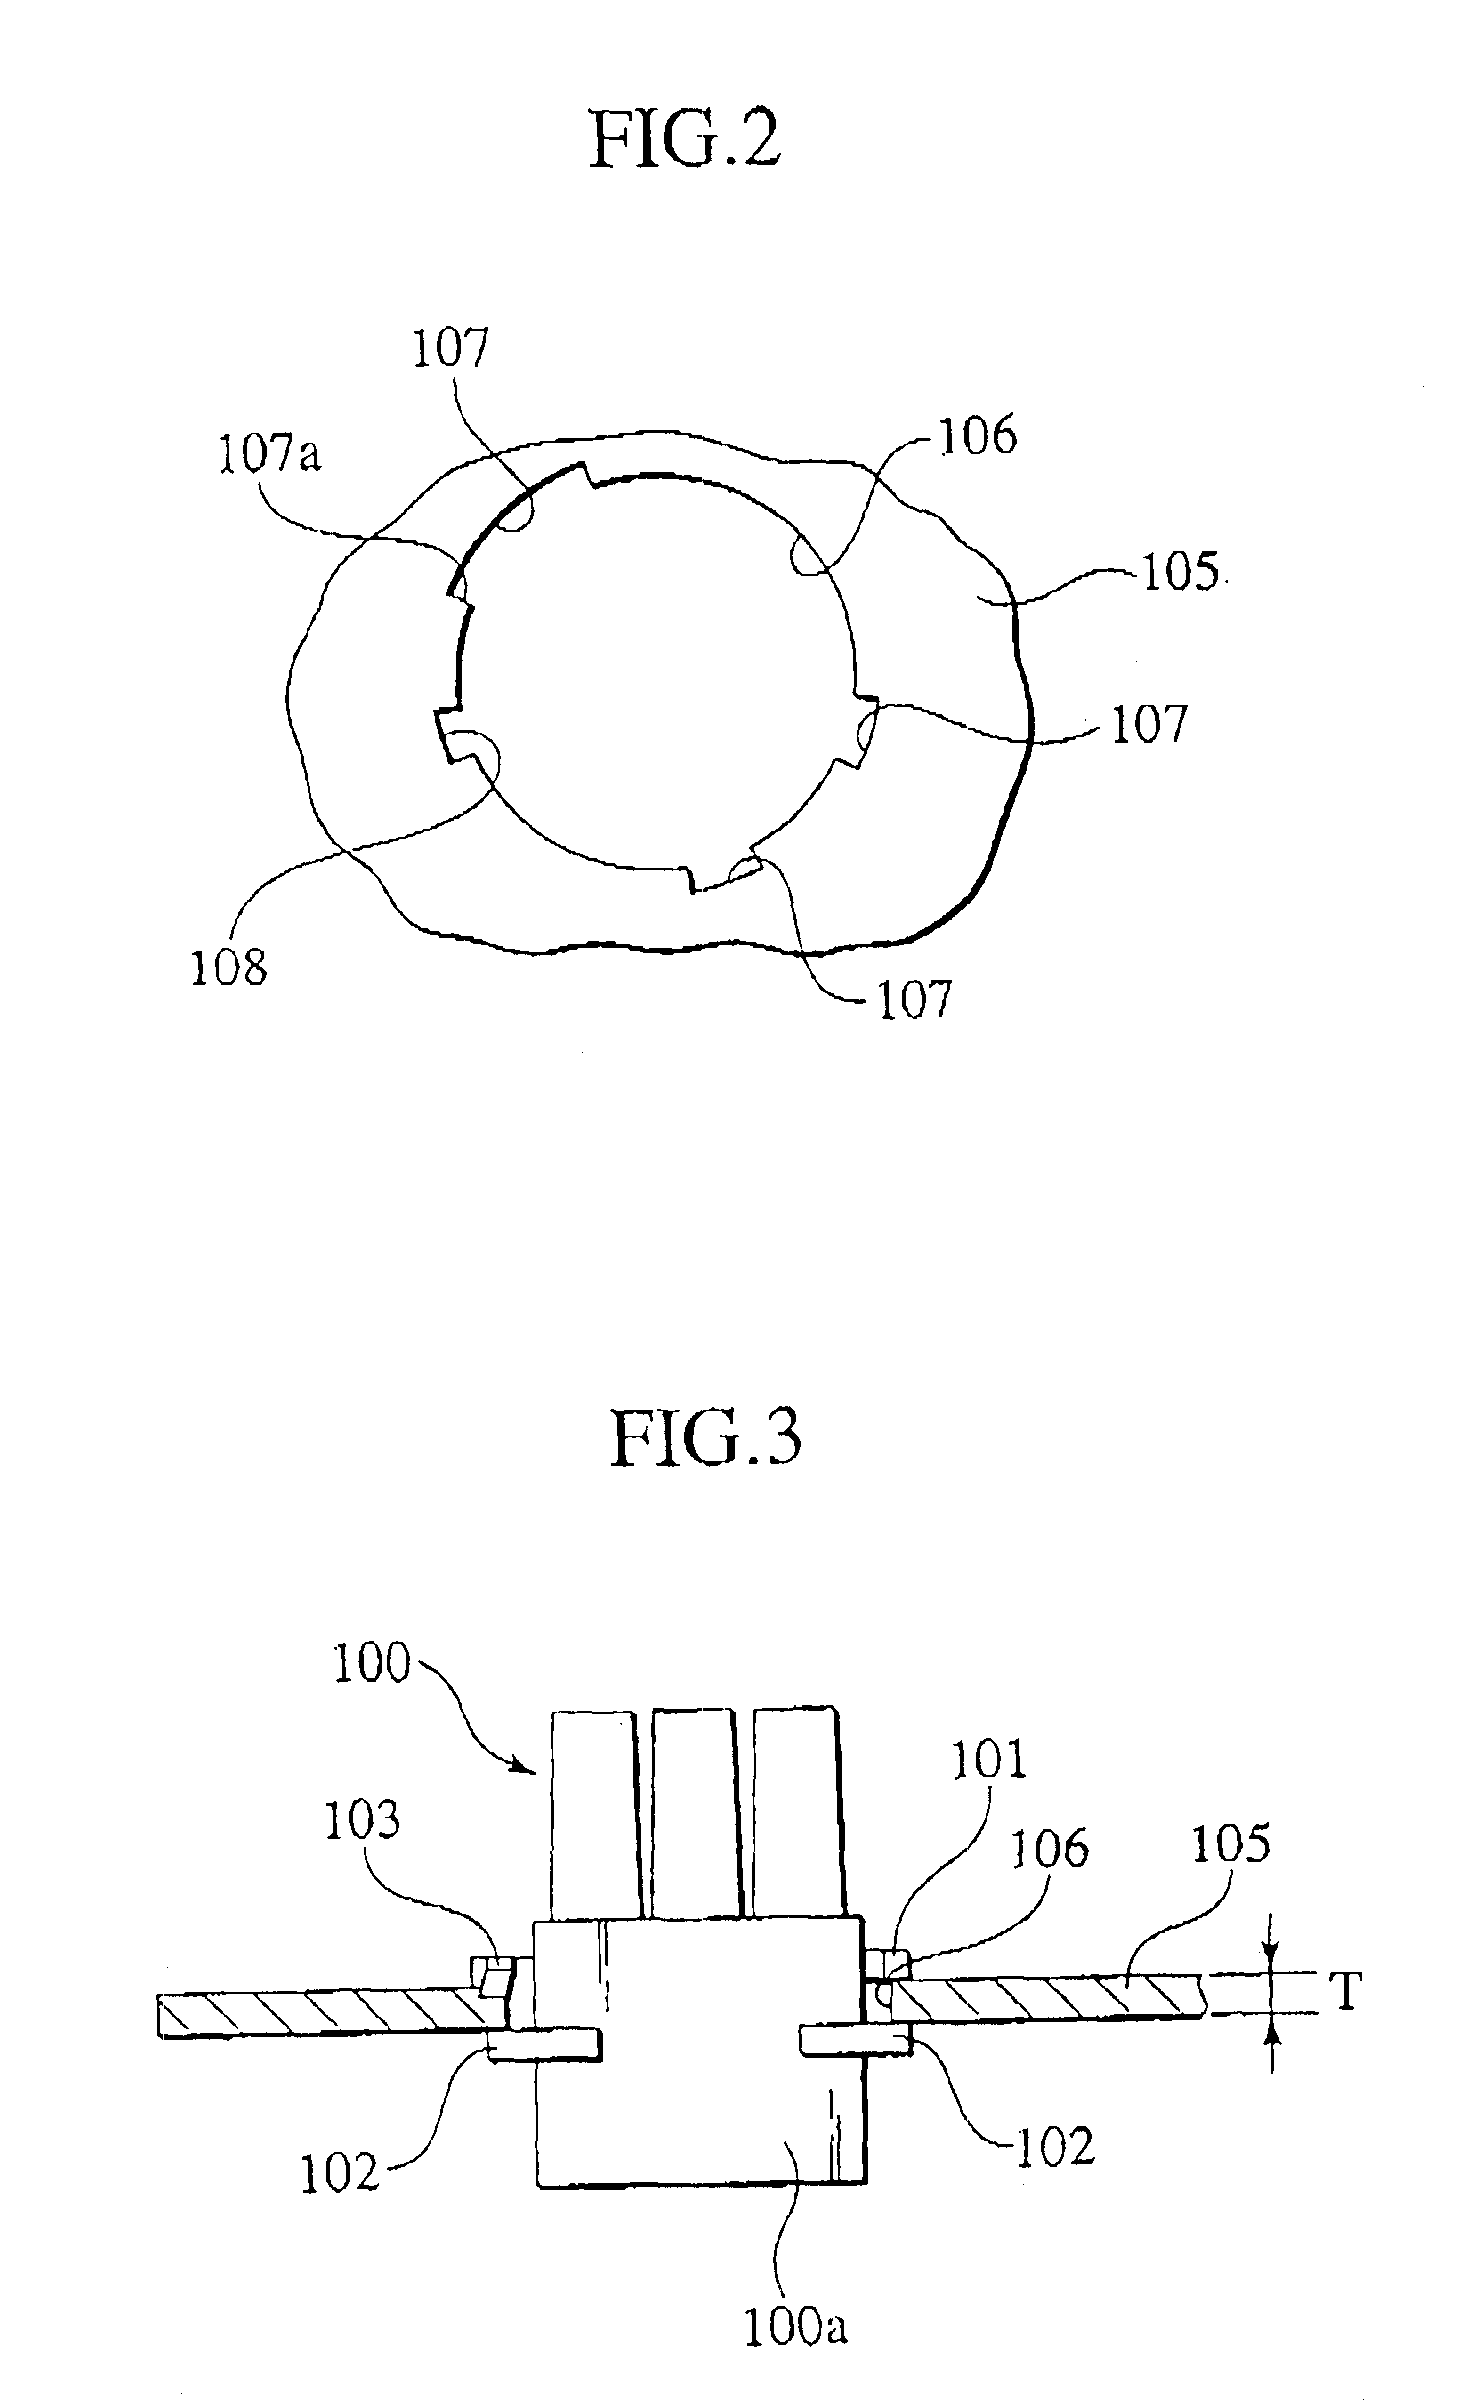 Bracket coupling structure